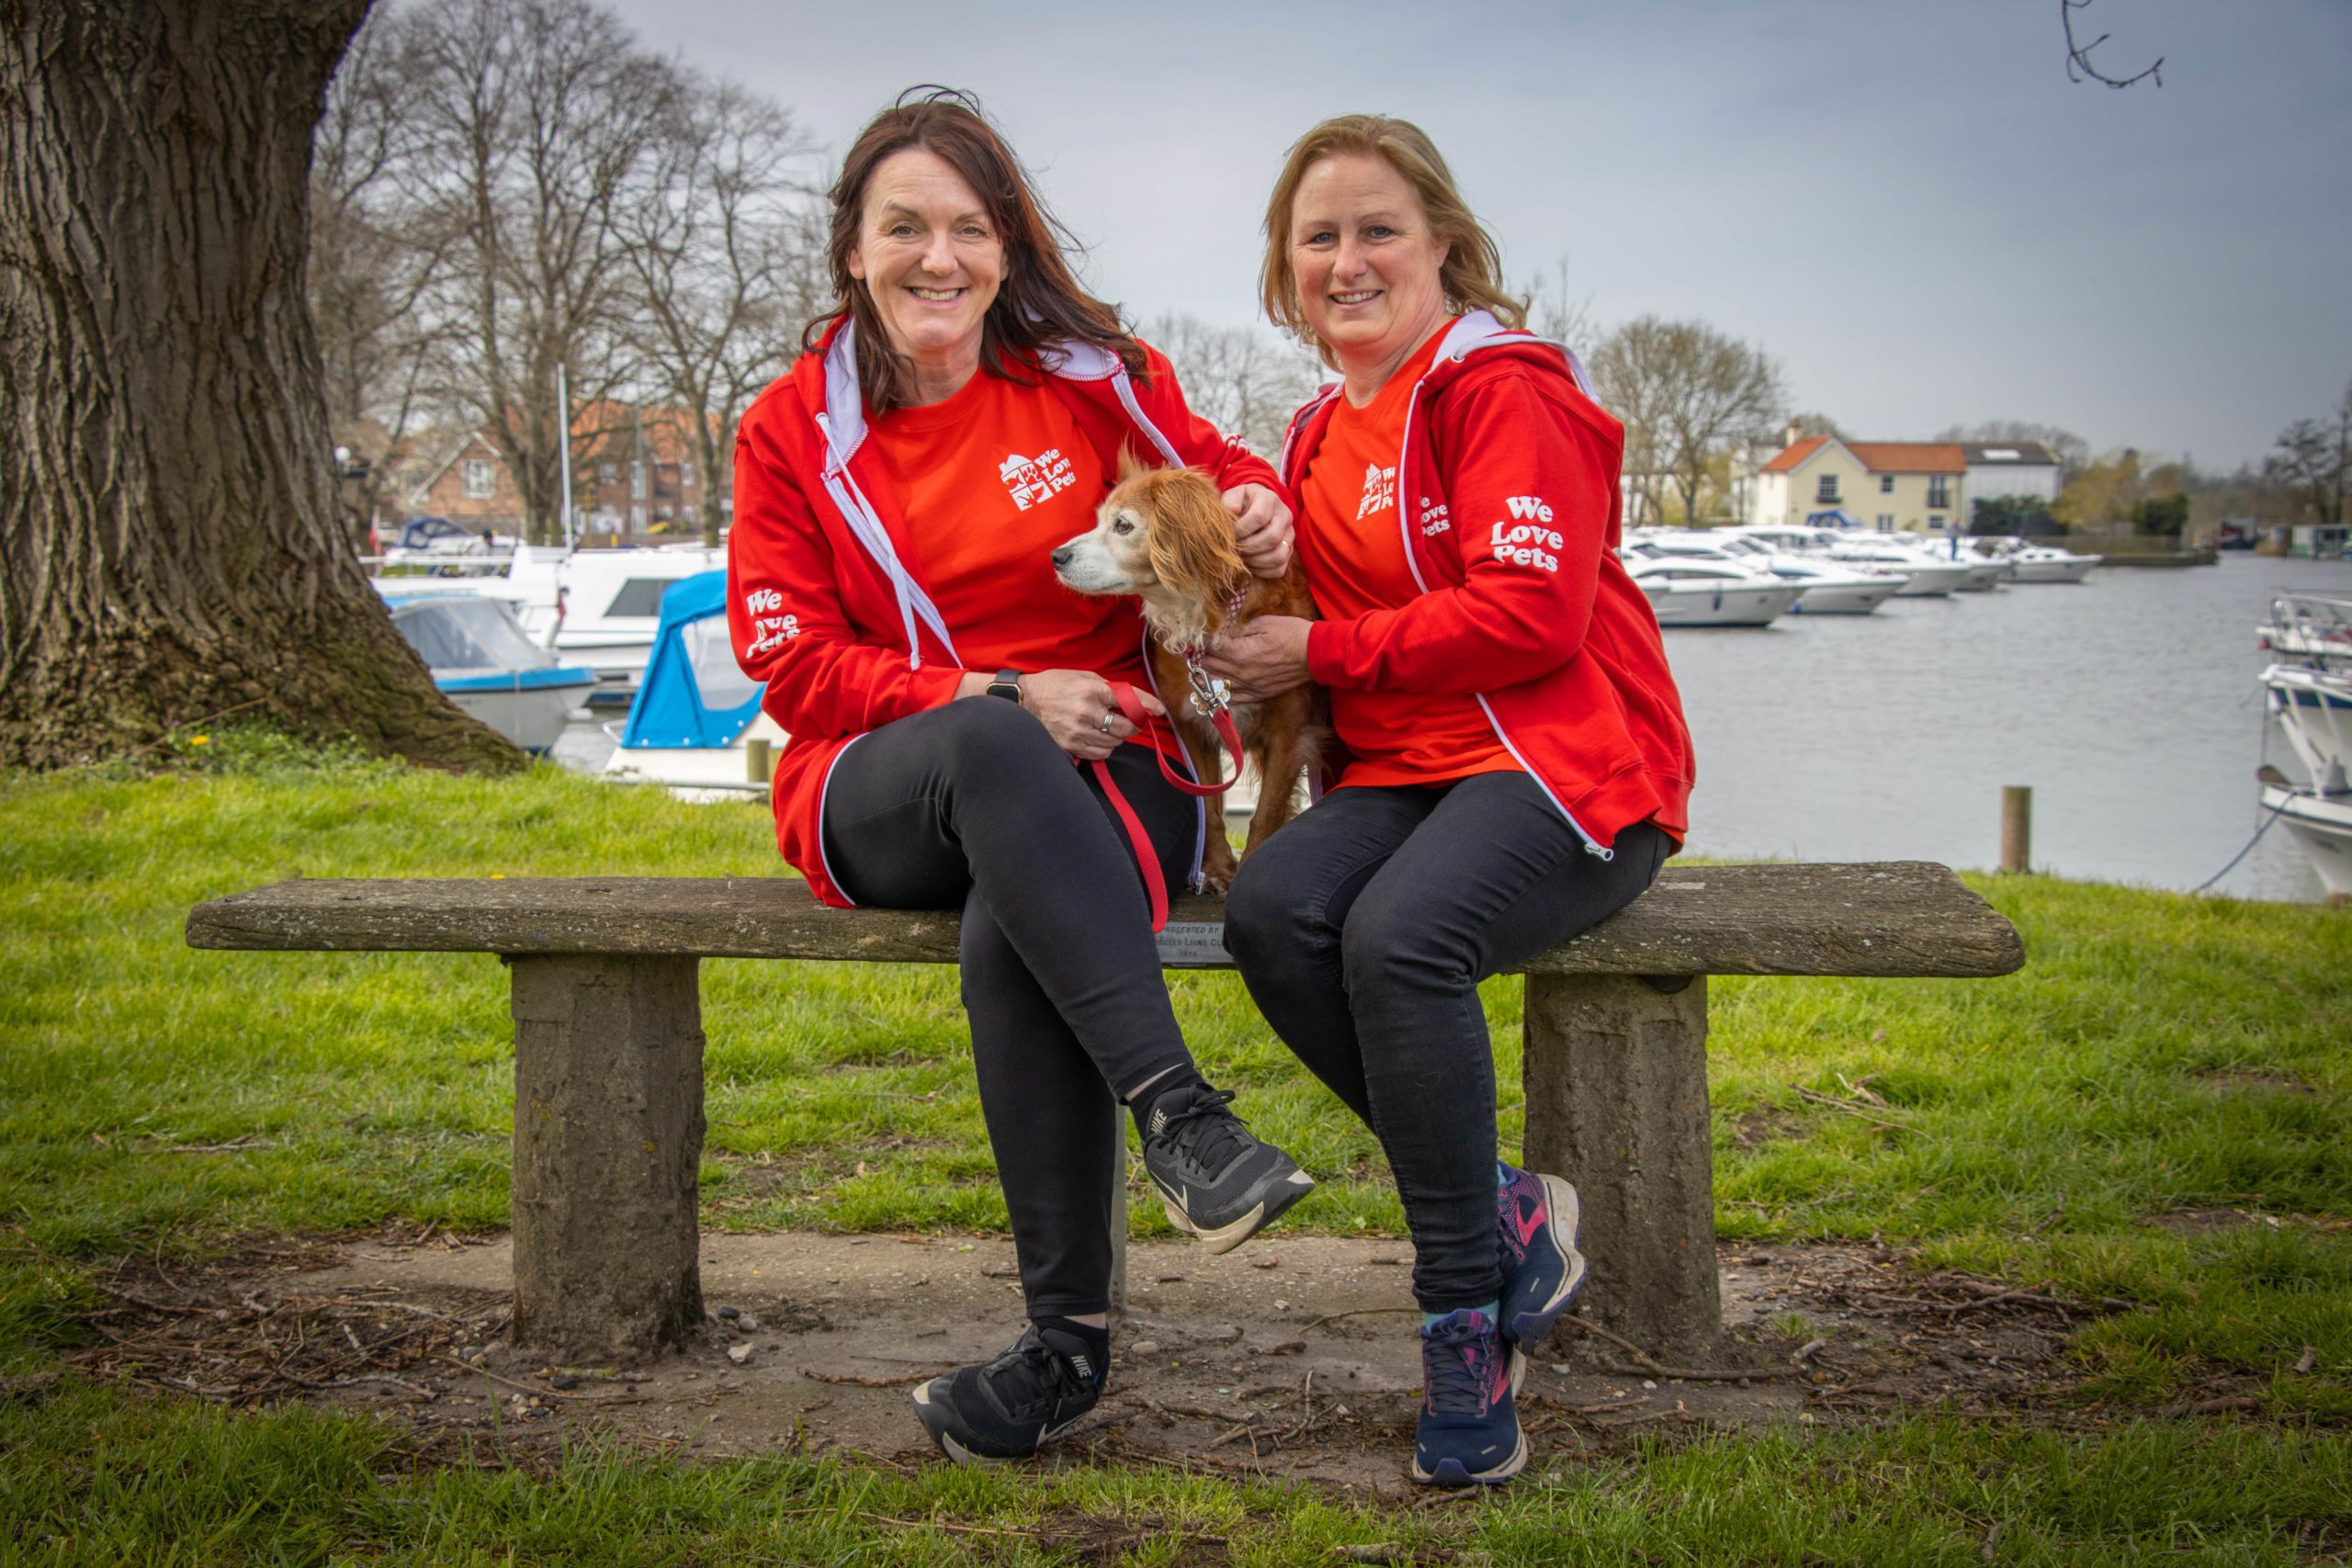 Ruth and Rachael from We Love Pets Woodbridge and Ipswich sitting on a bench holding dog